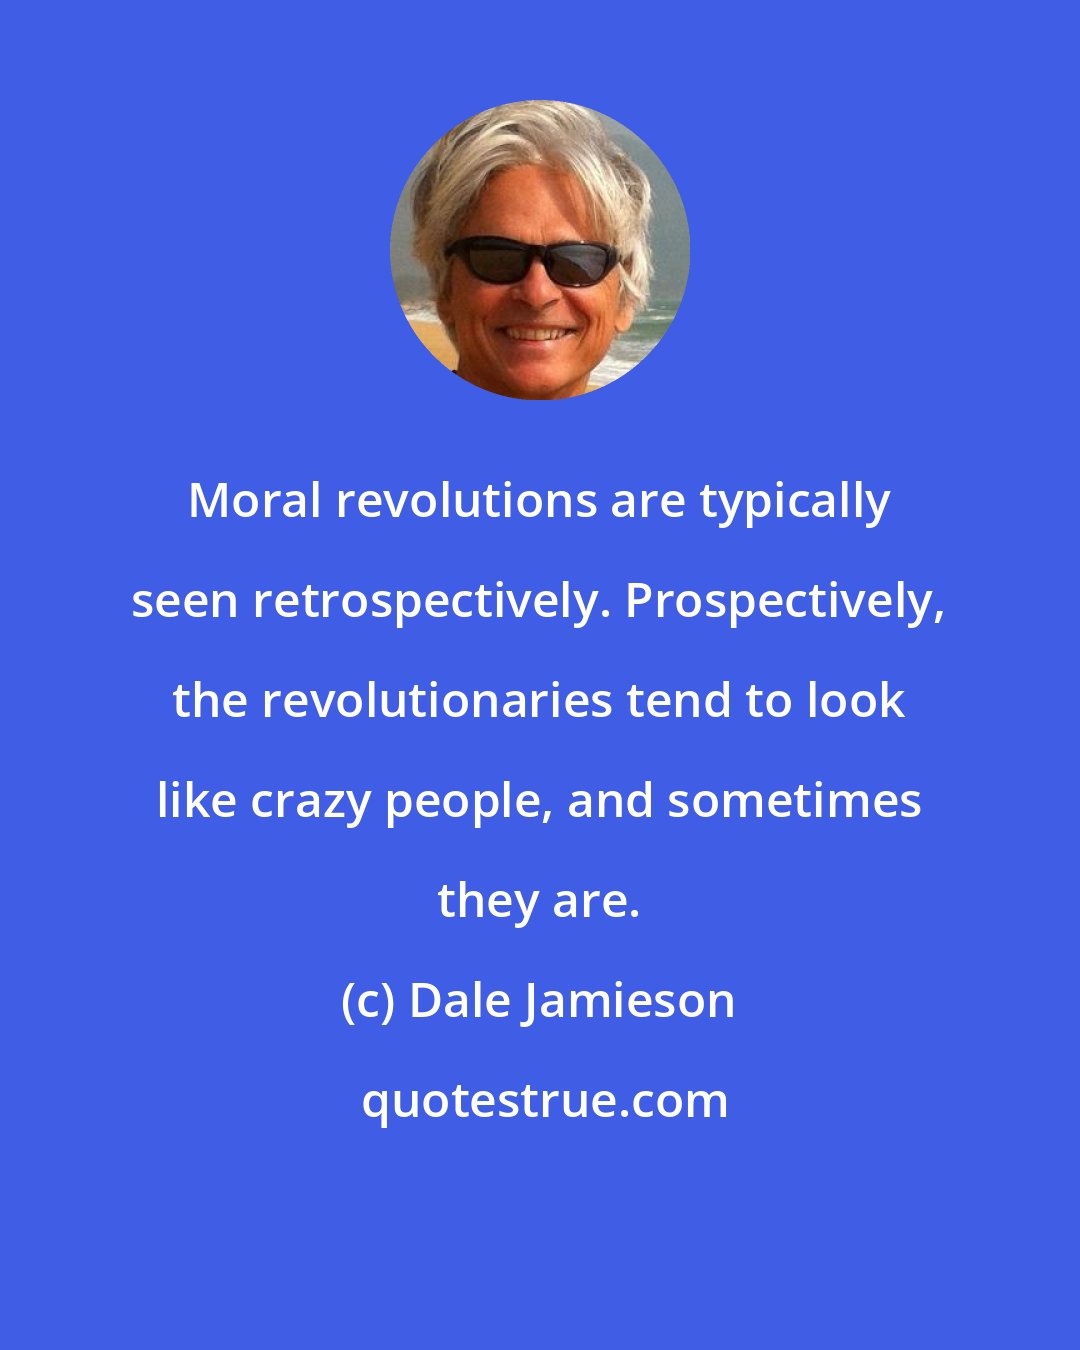 Dale Jamieson: Moral revolutions are typically seen retrospectively. Prospectively, the revolutionaries tend to look like crazy people, and sometimes they are.